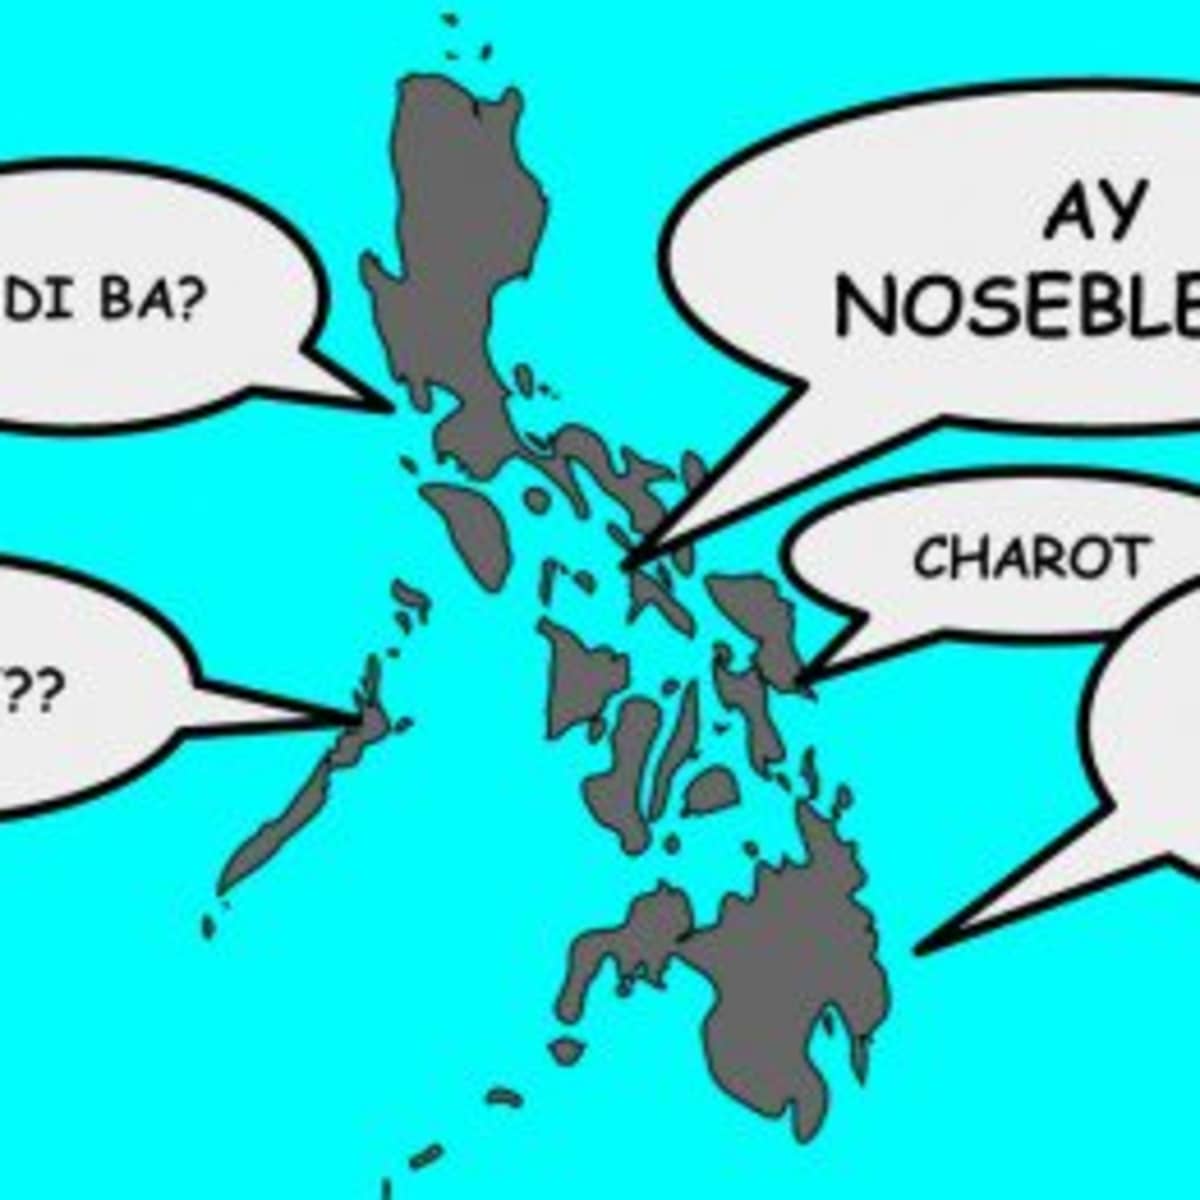 Popular Filipino Expressions And What They Mean Hubpages